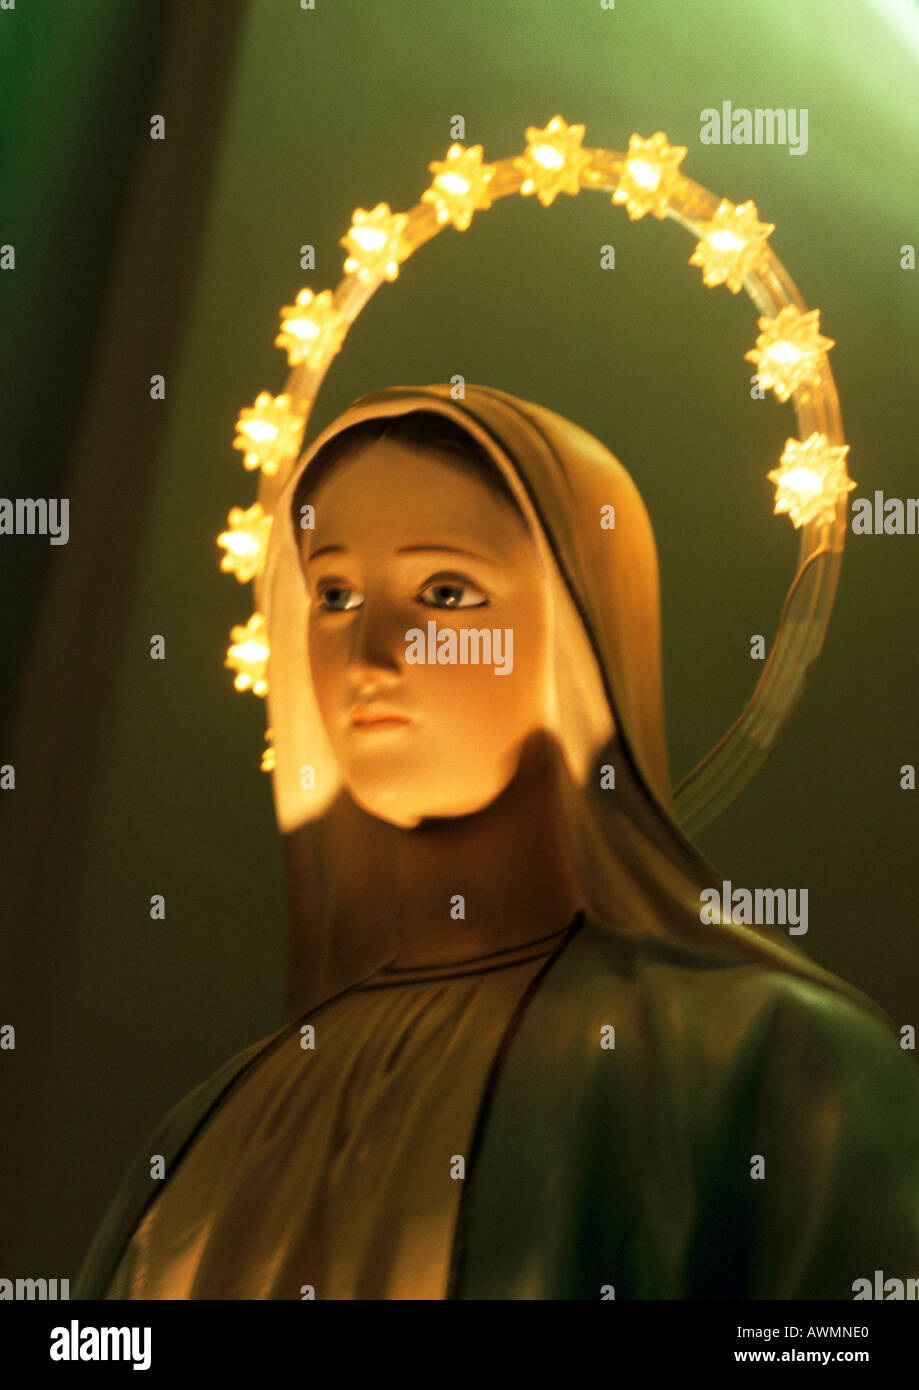 Statue of Virgin Mary, close-up of head Stock Photo